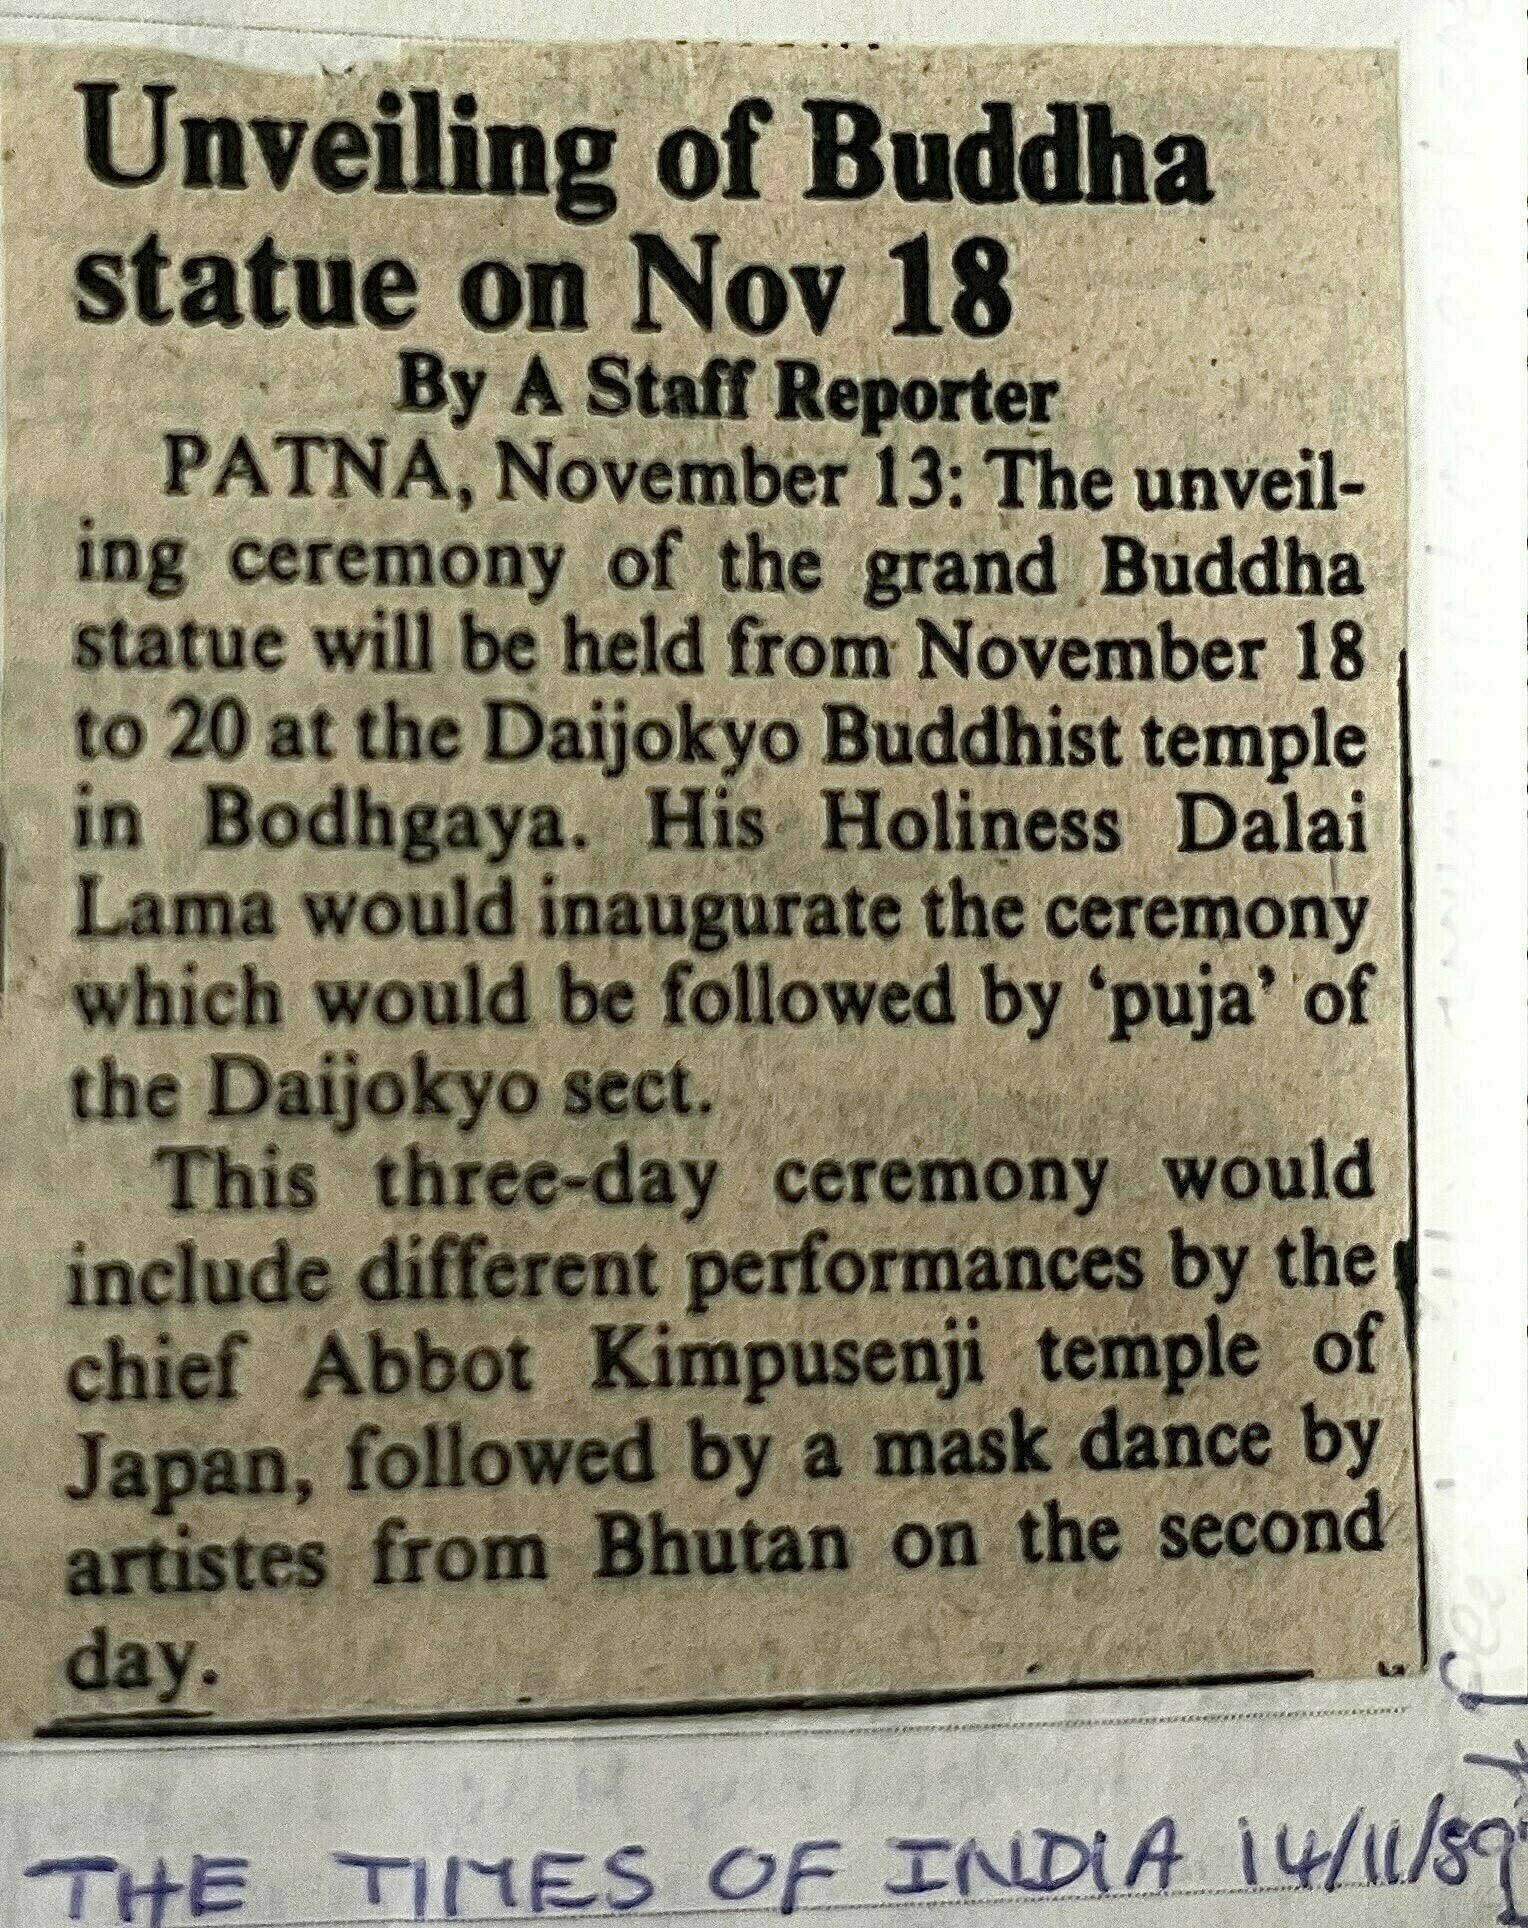 Newspaper clipping from The Times of India on November 14, 1989, announcing the unveiling of a Buddha statue on November 18 at the Daijokyo Buddhist temple in Bodhgaya by His Holiness the Dalai Lama